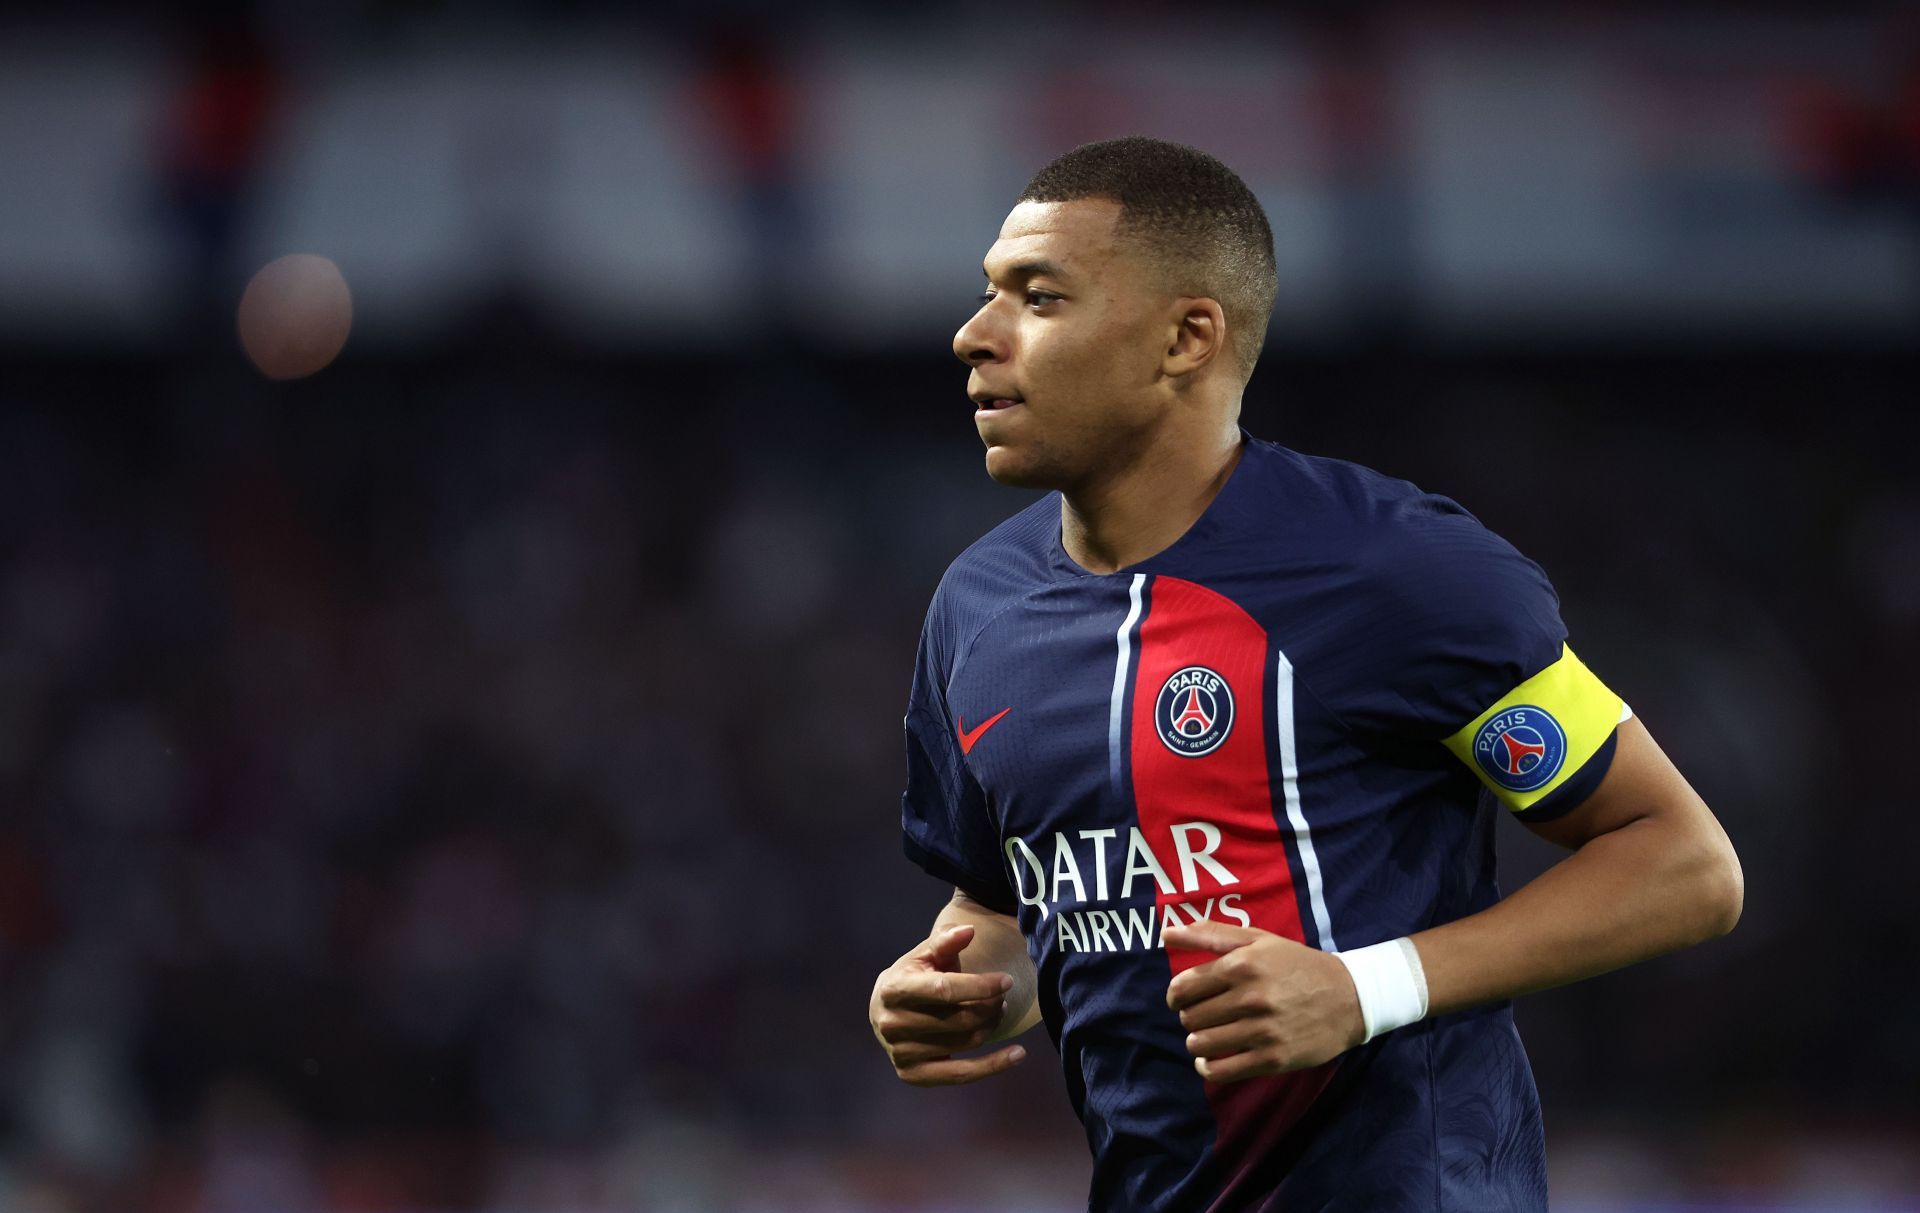 Mbappe could leave PSG for a world-record fee.